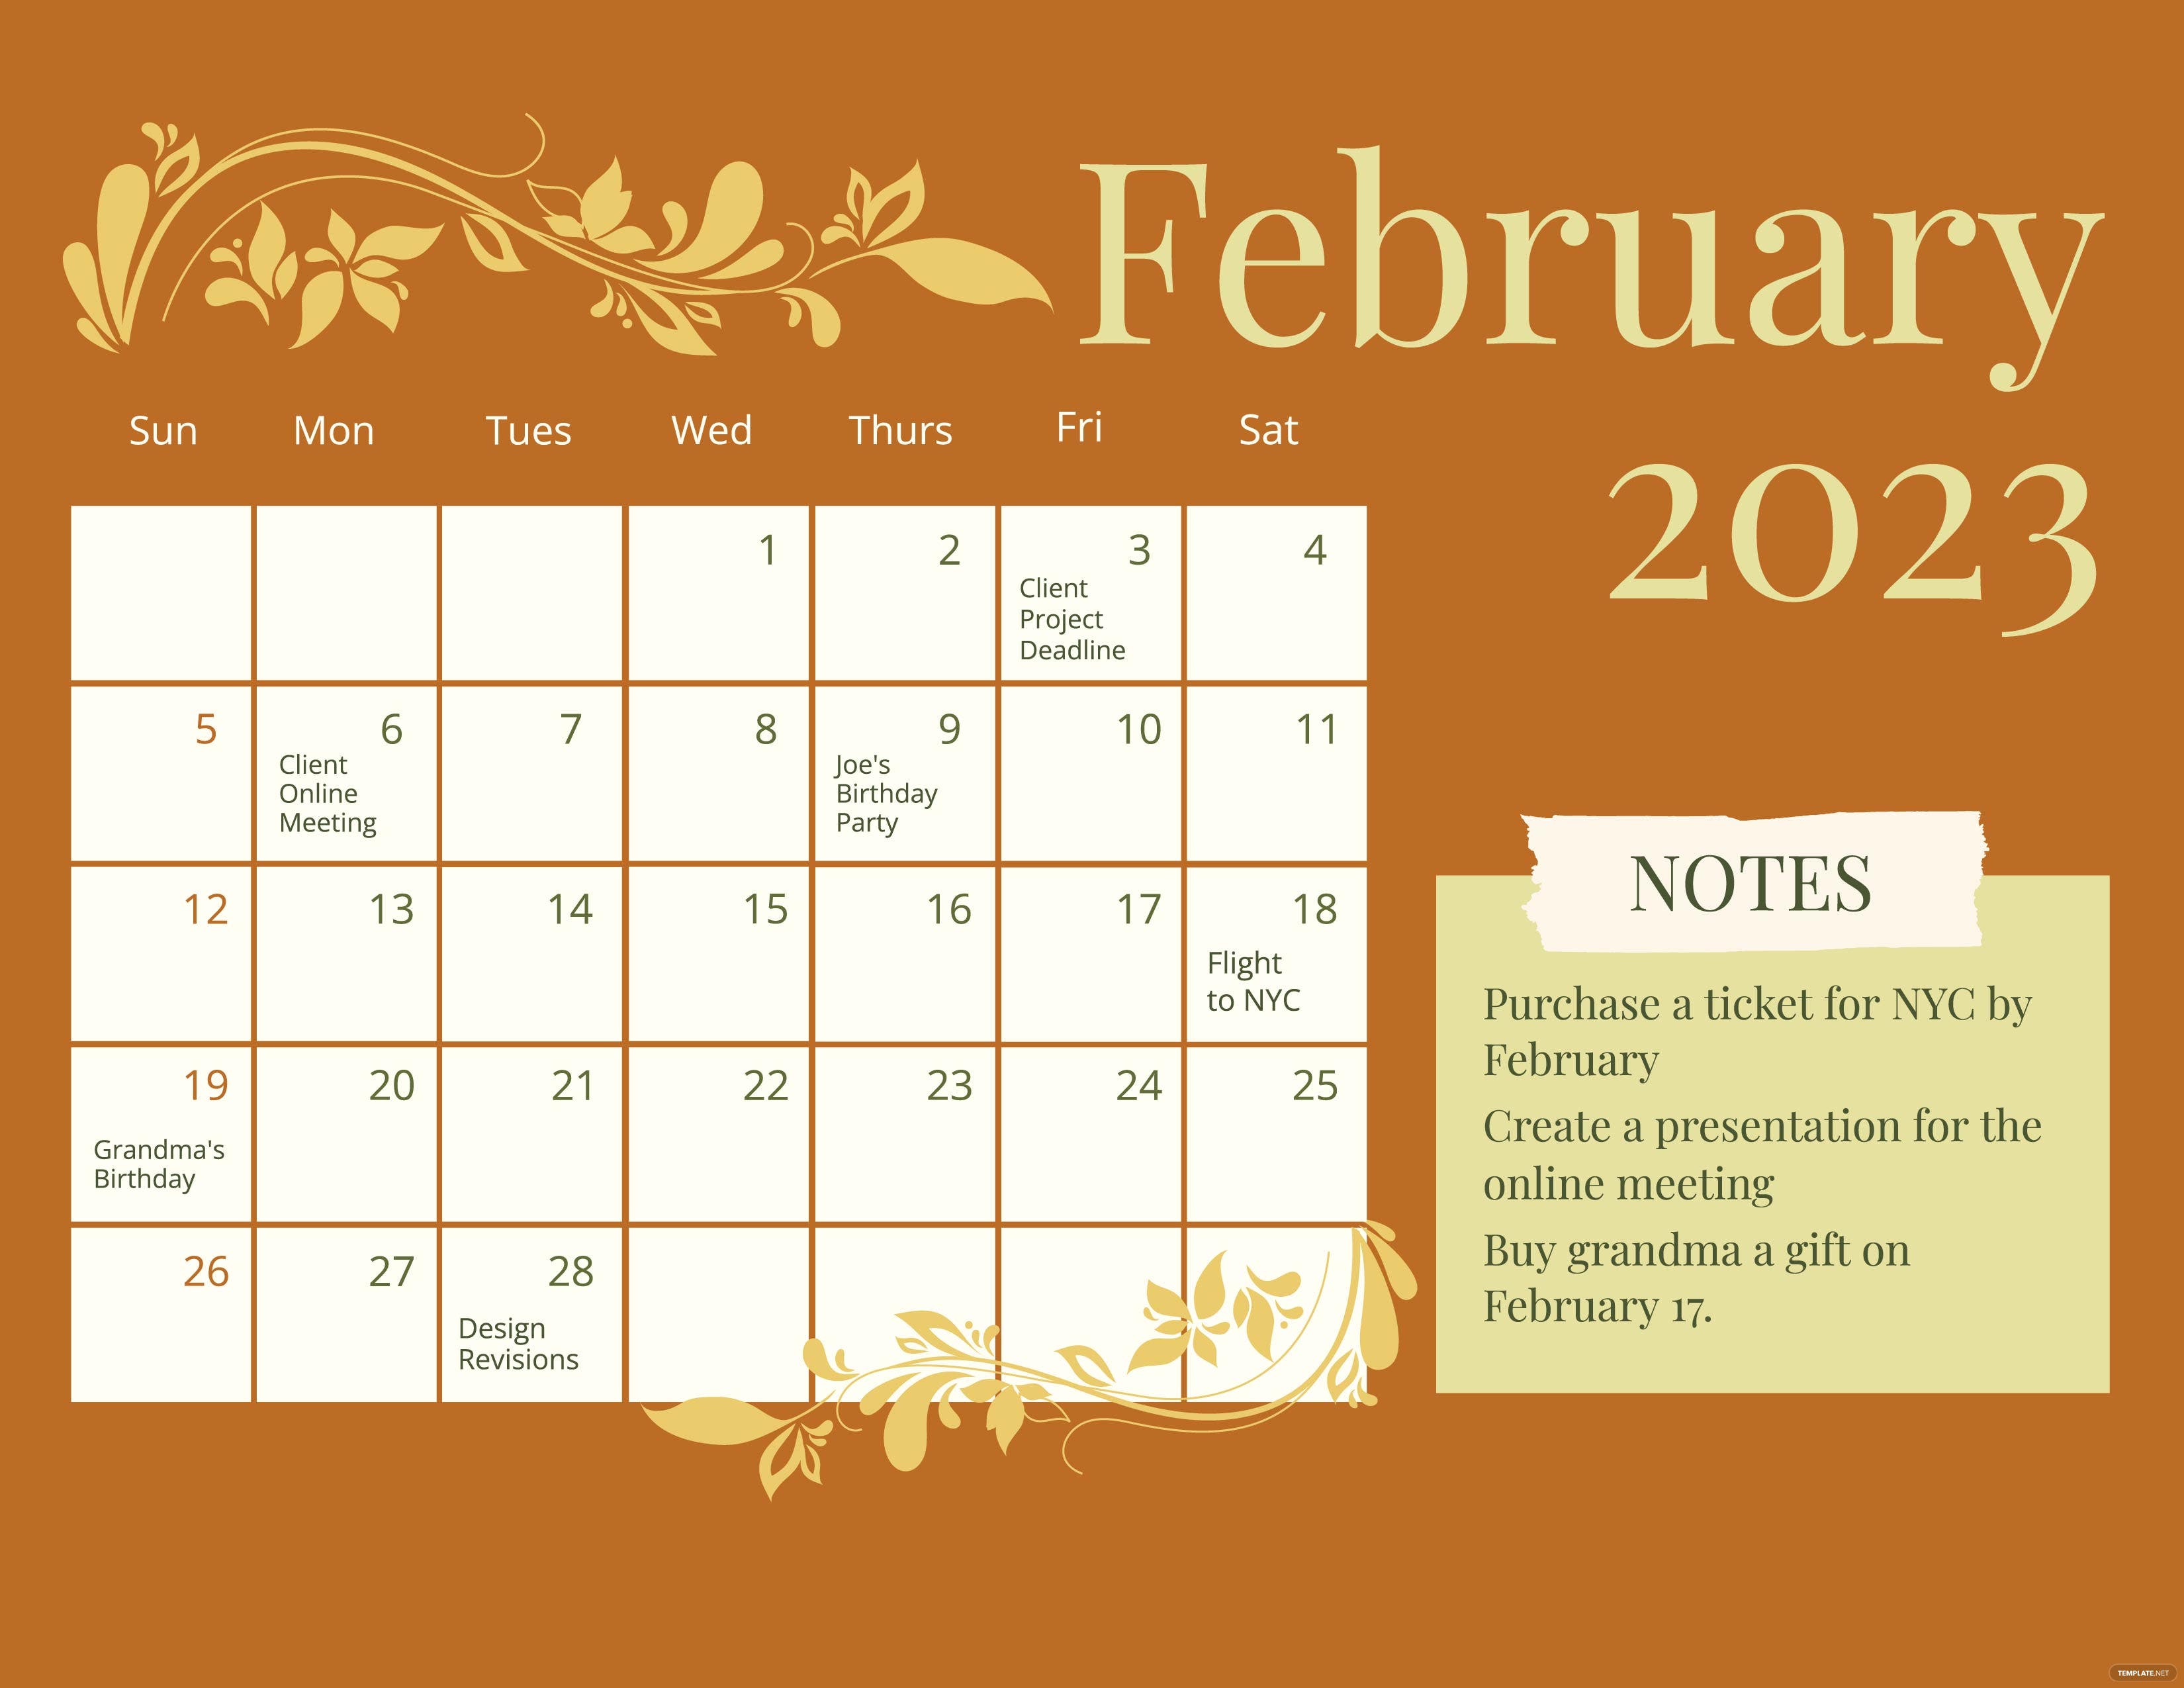 Free Fancy February 2023 Calendar Docs, Illustrator, Word, Apple Pages, PSD